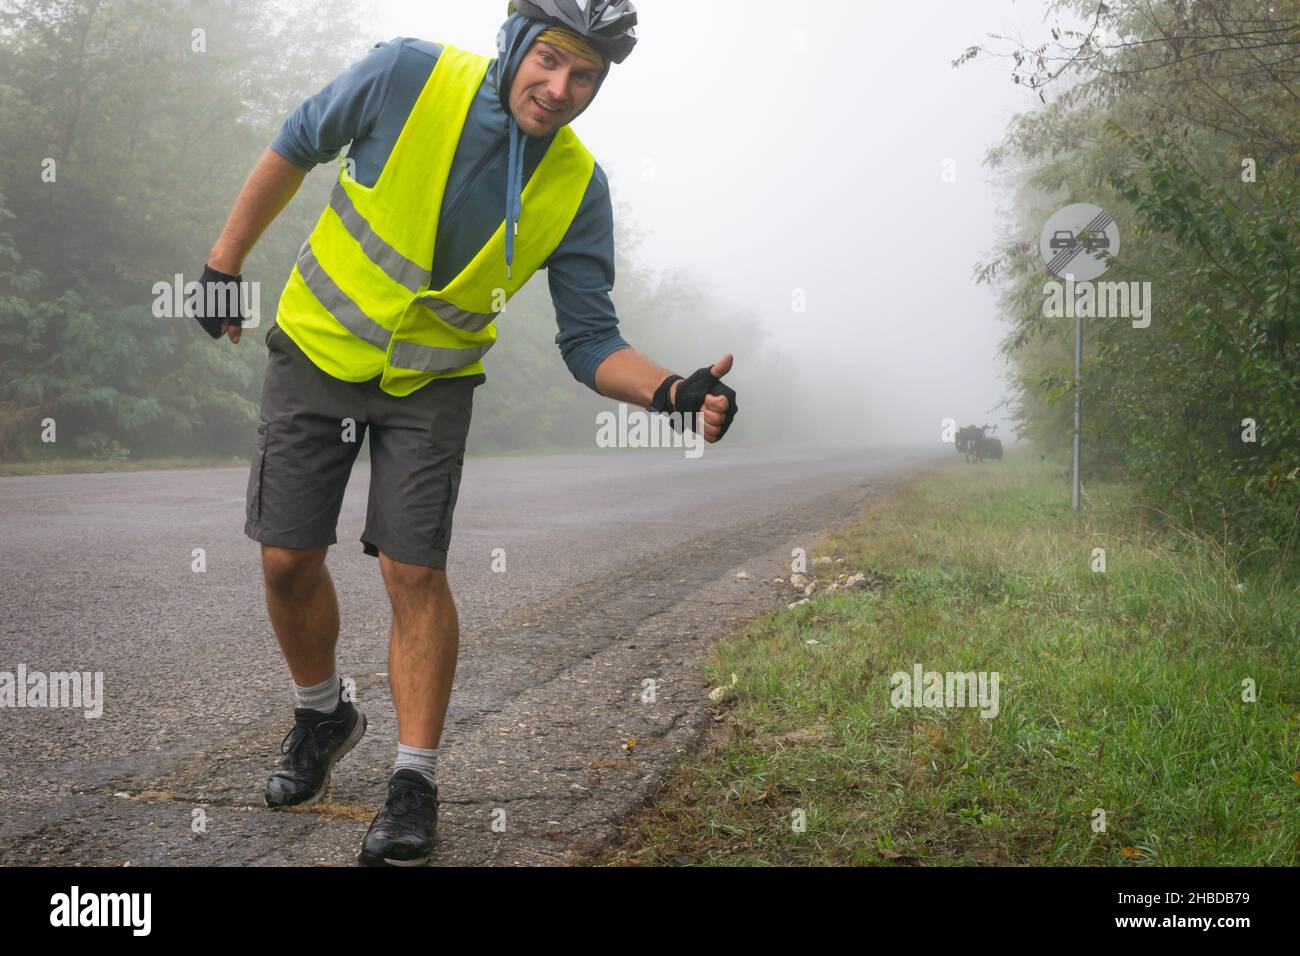 Happy cyclist with a reflective vest shows thumbs up by the road in a foggy conditions ith a touring biccyle nearby. Concepton of sAfe cycling under b Stock Photo